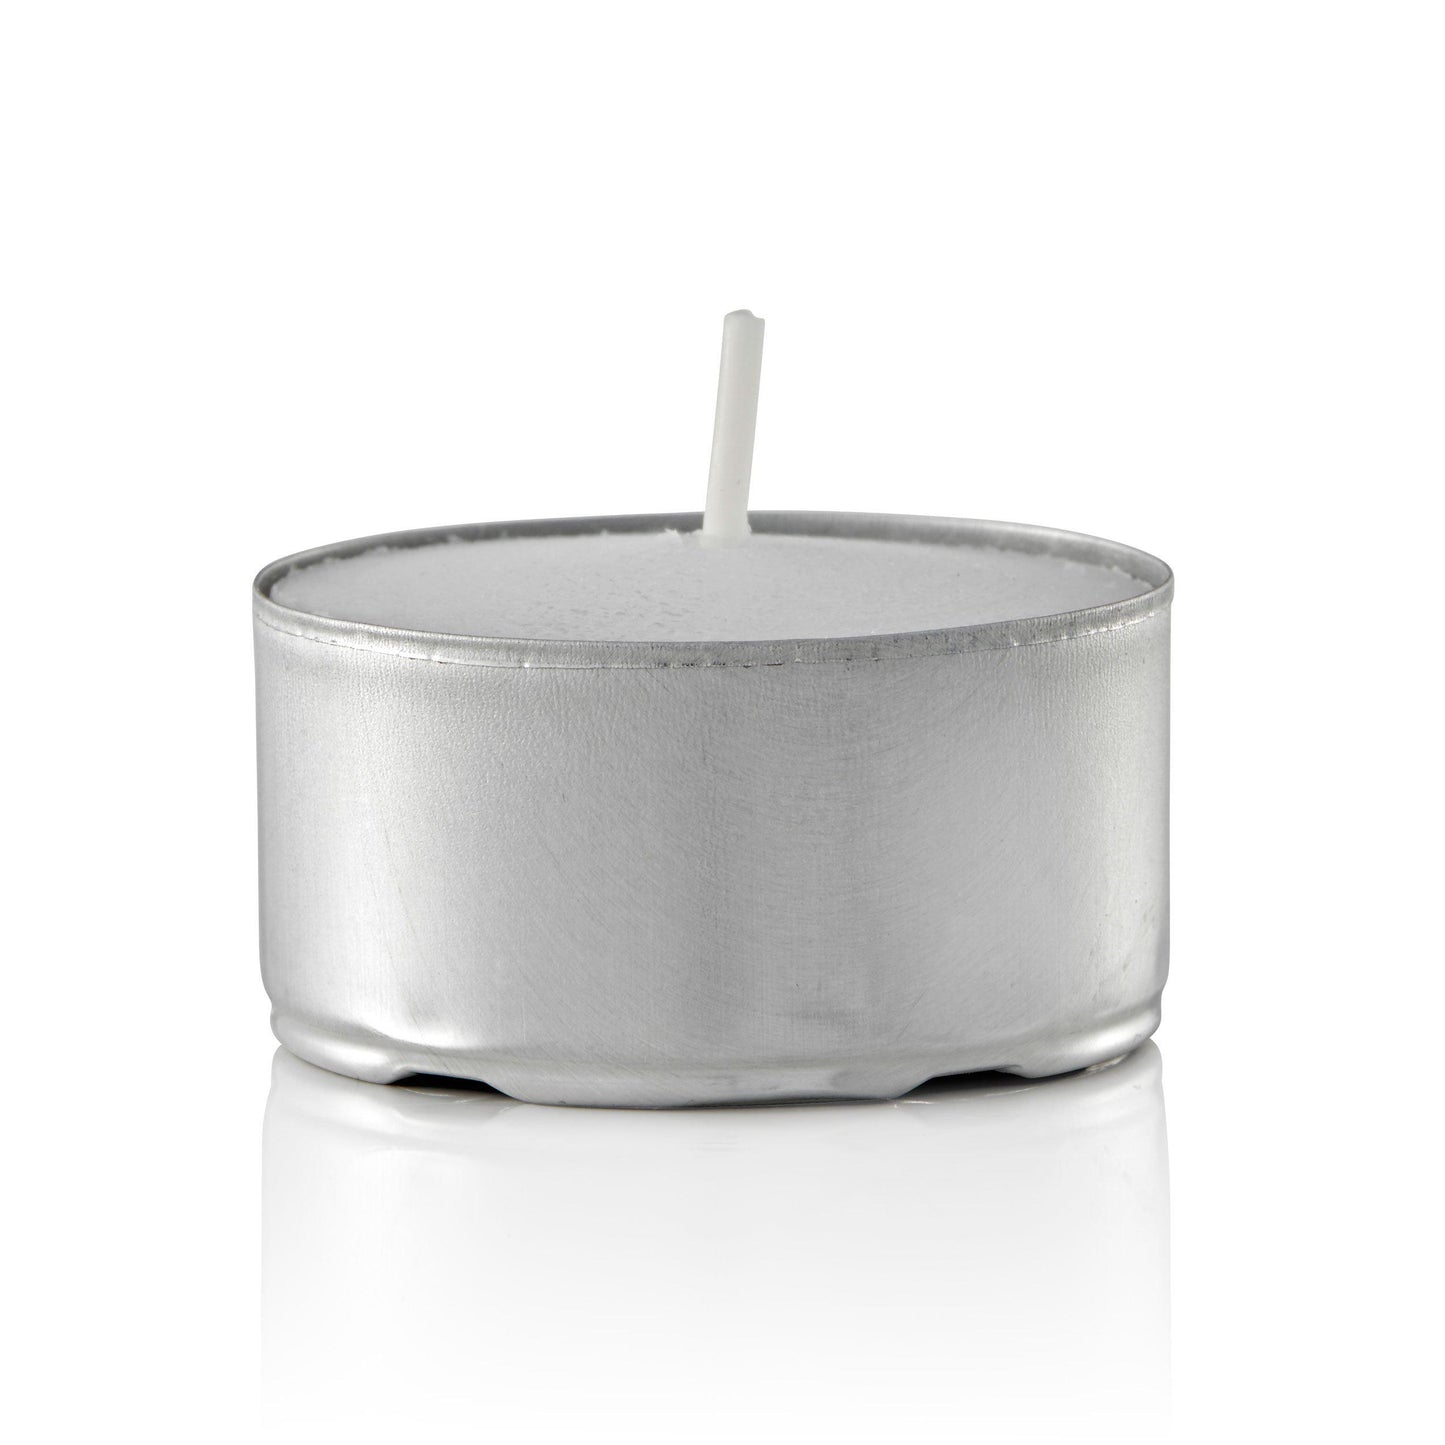 7 Hour Tealight Candles in Metal Cups, White, Unscented, Set of 400-tealight candles-TableTopLighting.com